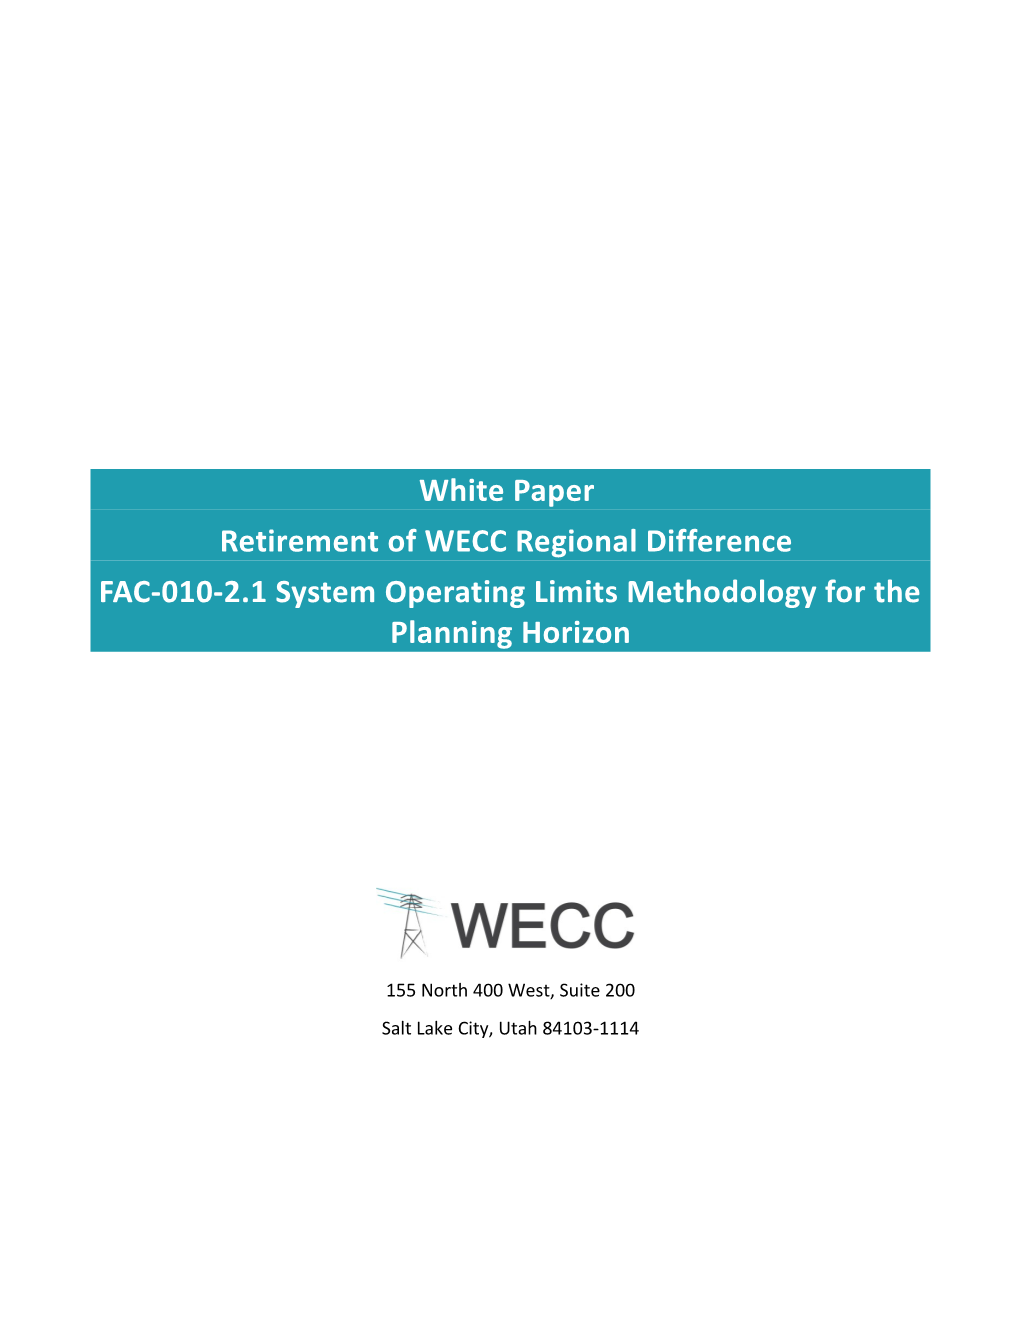 WECC-0113 Posting 1 FAC-010-2 1 SOL Method for the Planning Horizon - White Paper to Retire